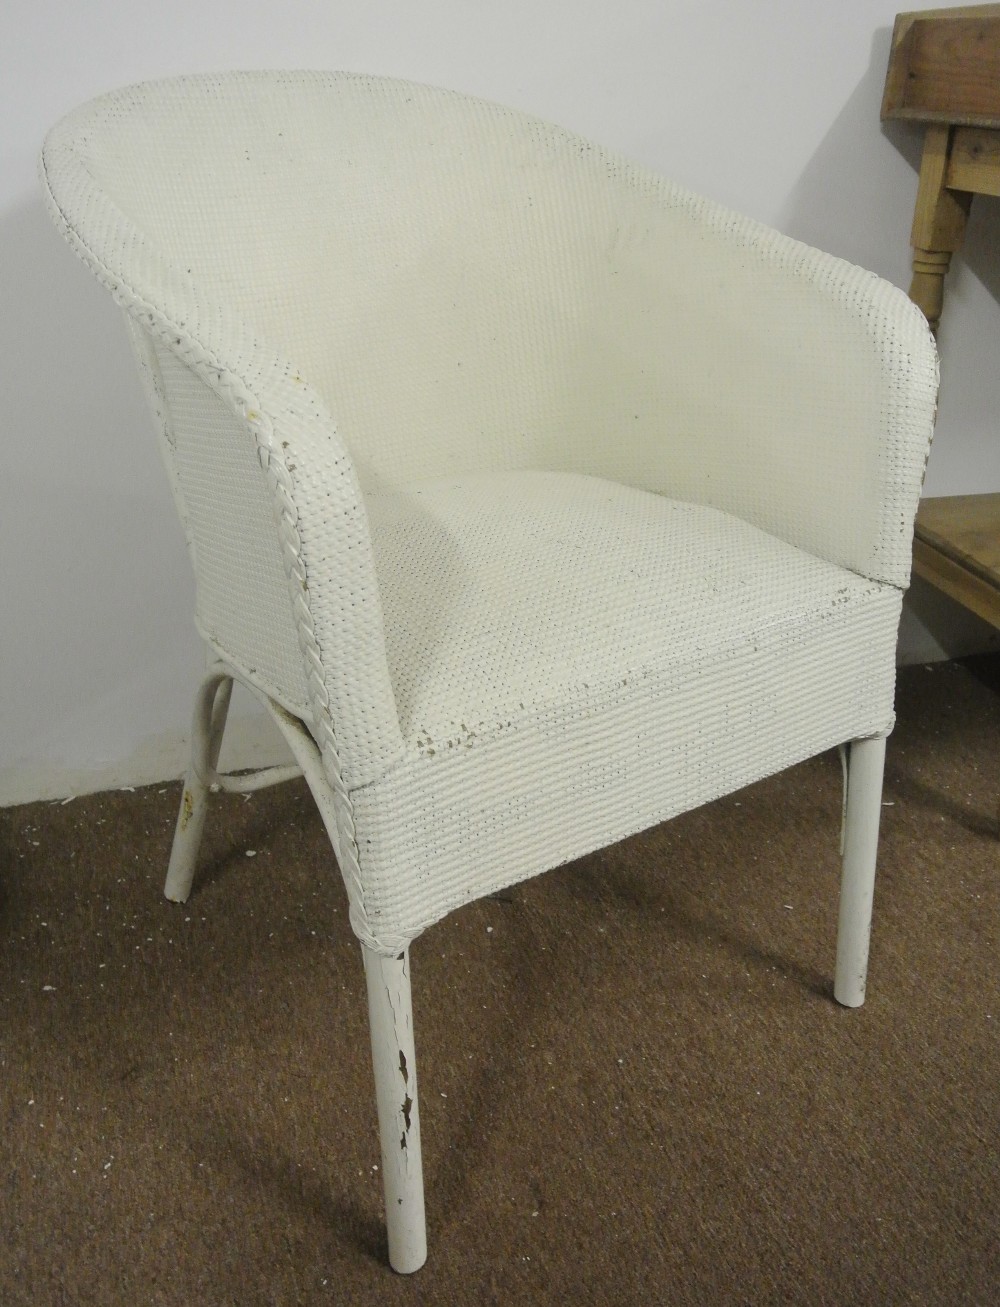 FURNITURE/ HOME - A vintage Lloyd Loom style chair with metal frame, which has been painted white.